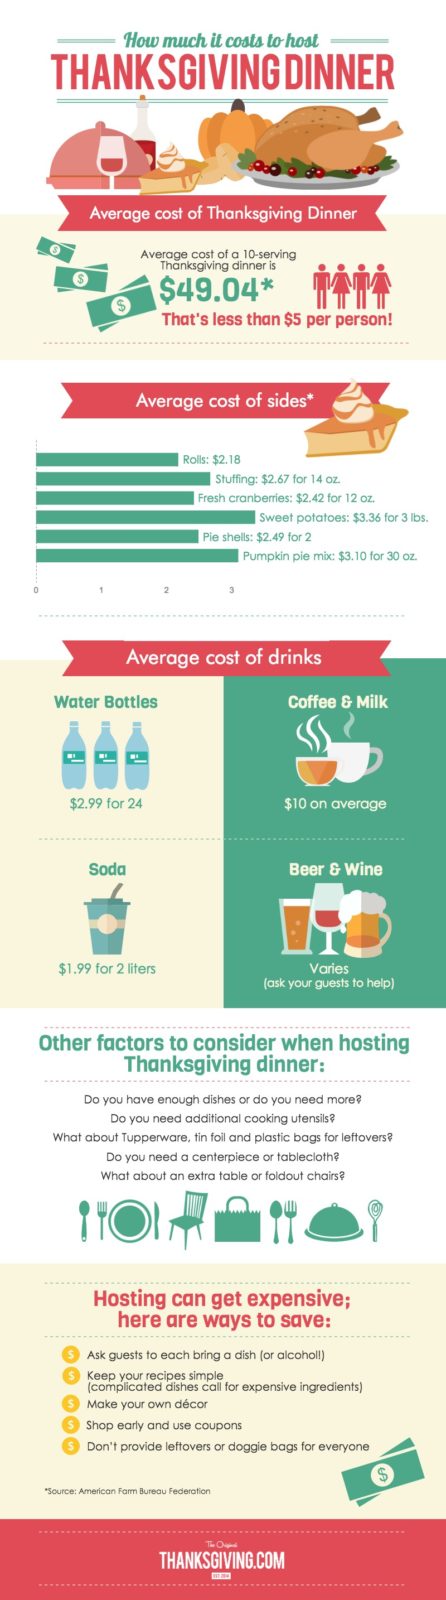 Infographic The Cost of Thanksgiving Dinner from MakeItGrateful.com